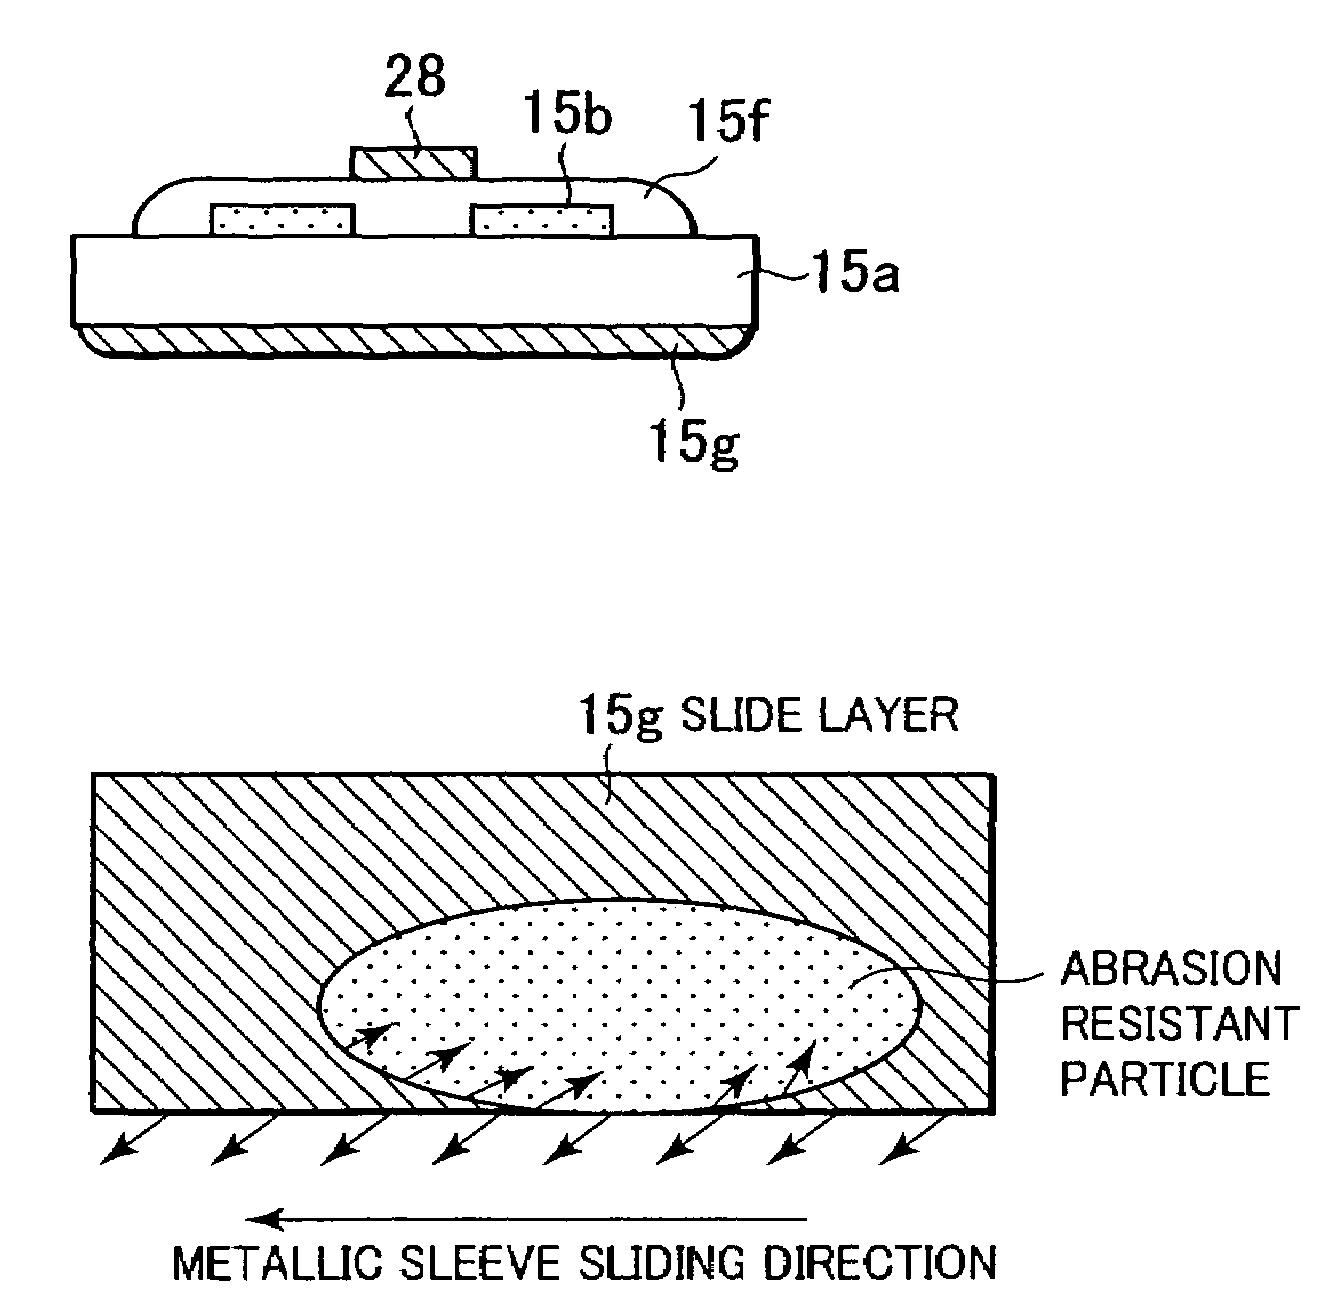 Image heating apparatus including flexible metallic sleeve, and heater used for this apparatus